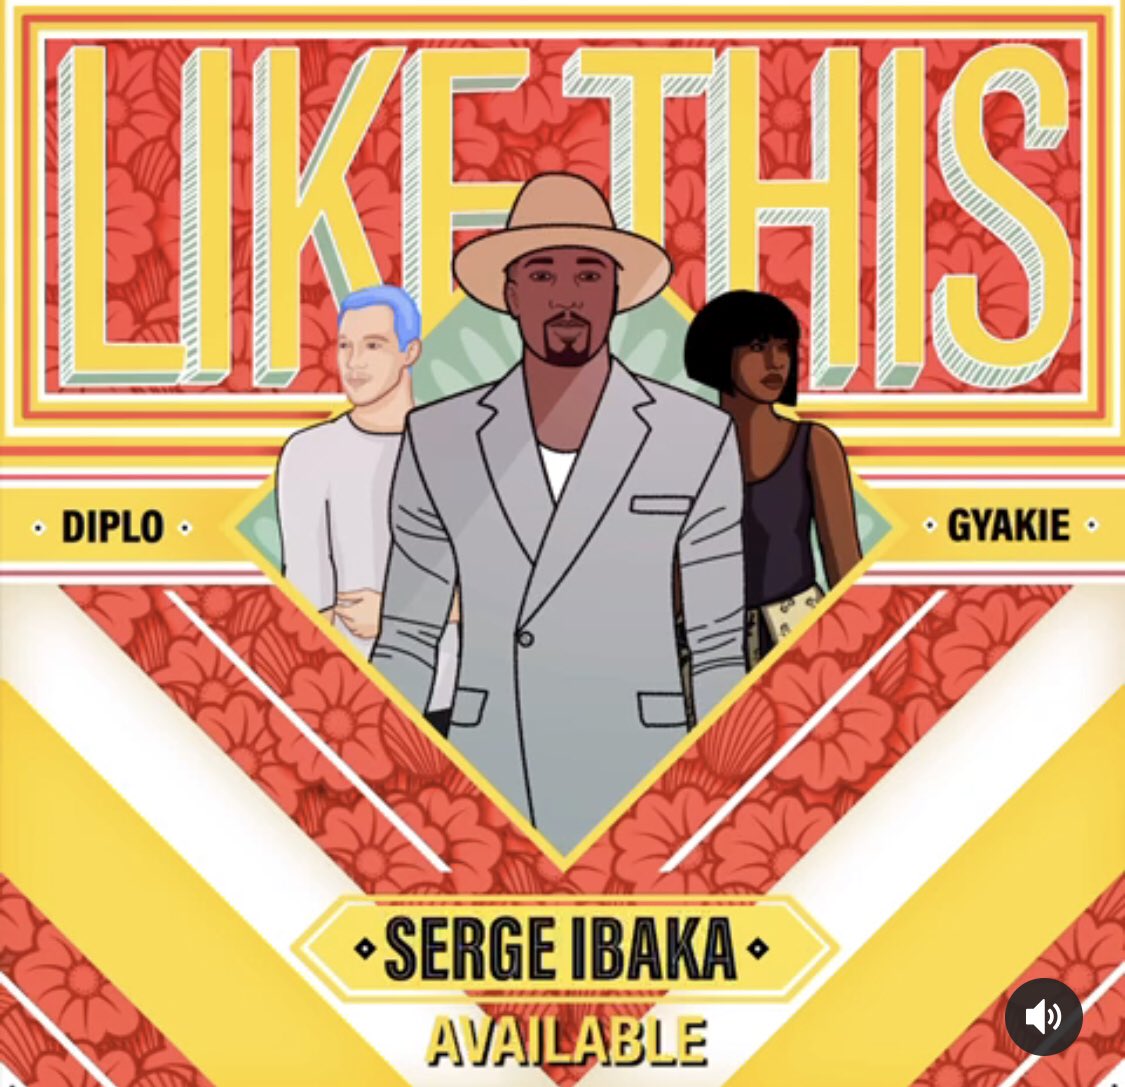 Gyakie featured by NBA Star, Serge Ibaka and Grammy Winner, Diplo on new song